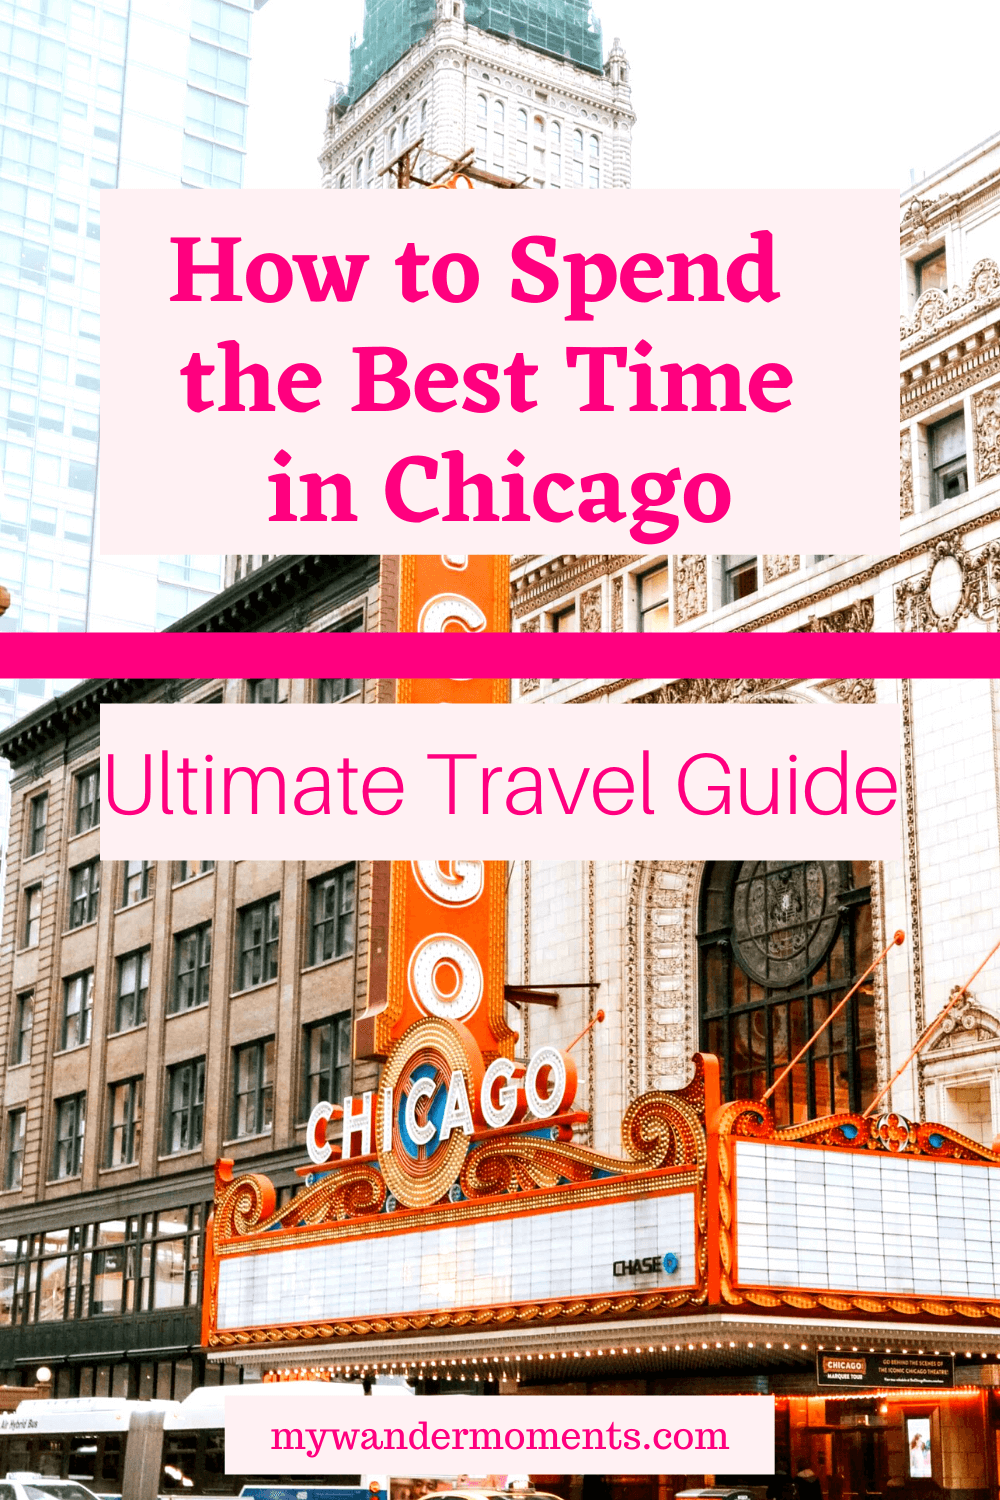 what are best places to visit in chicago